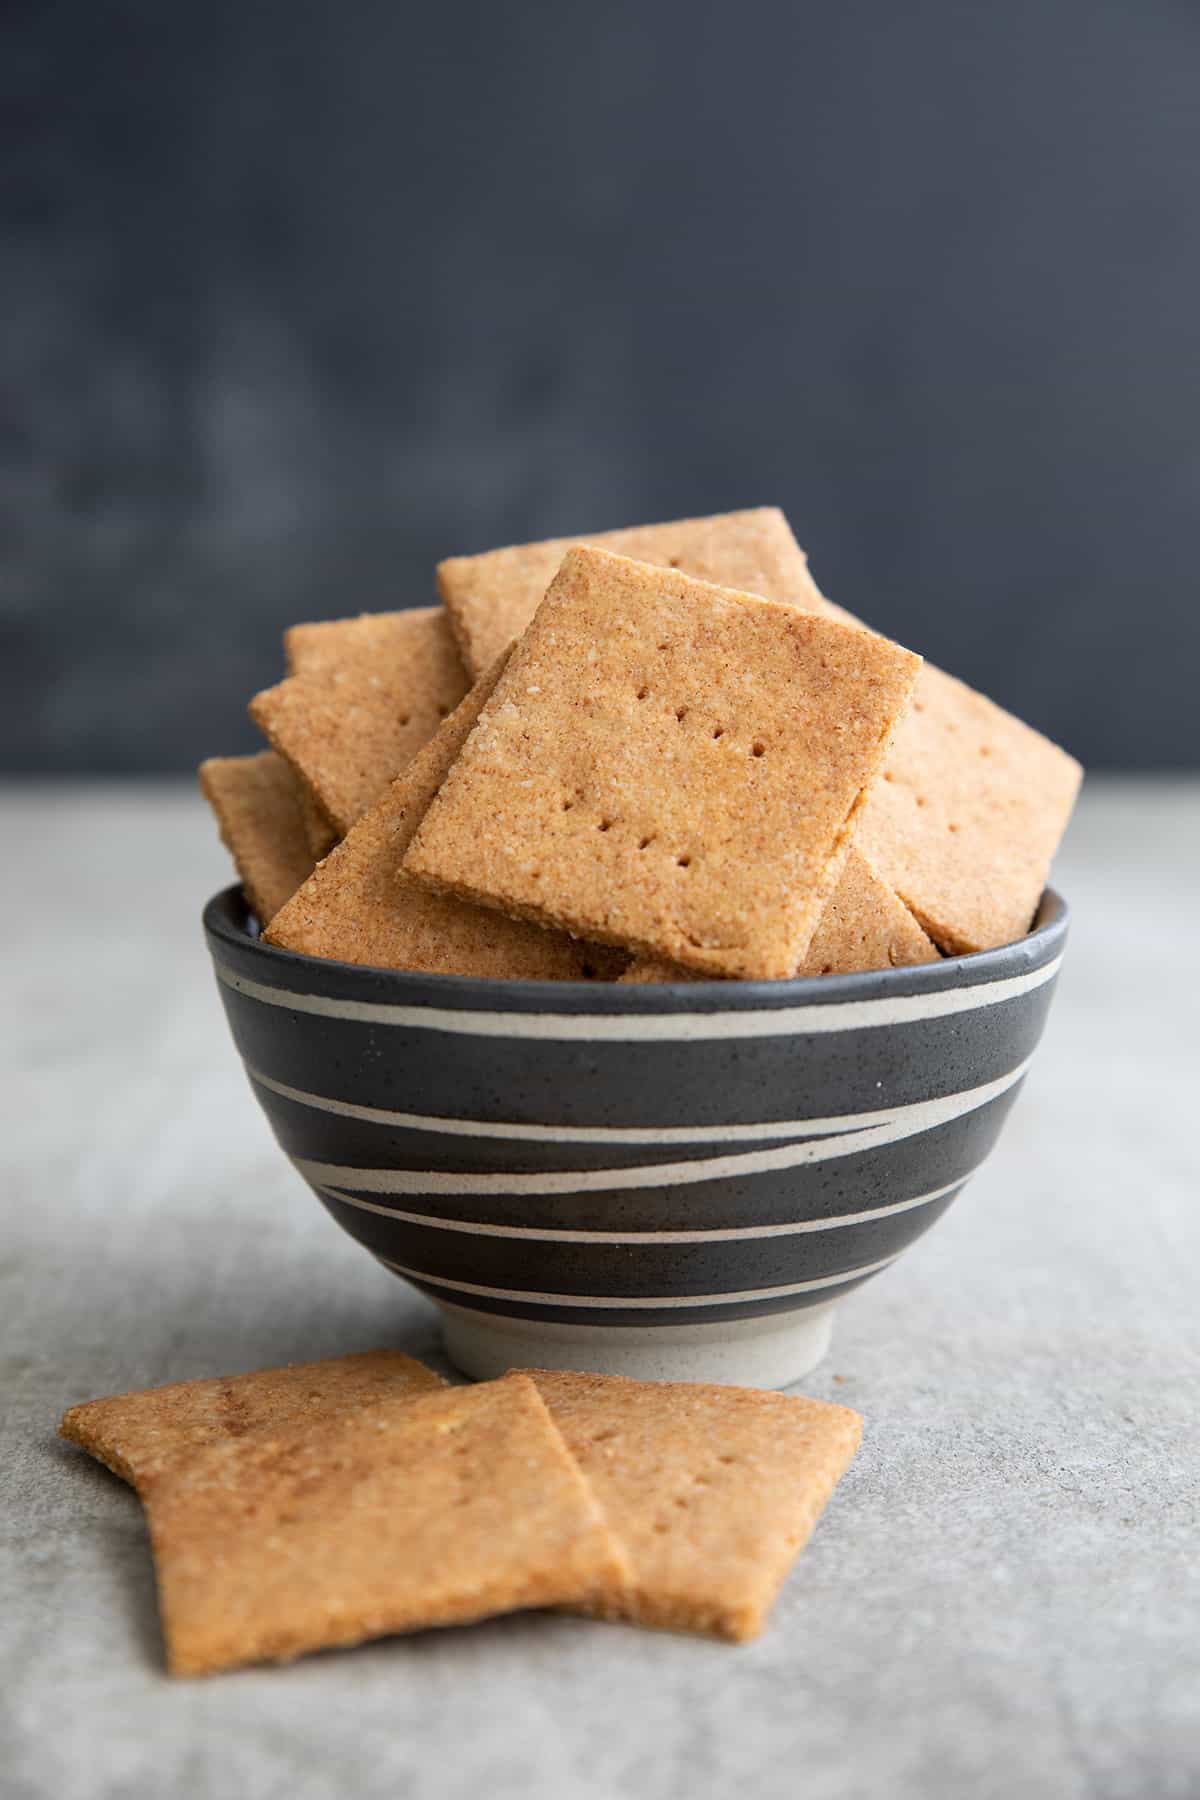 Sugar free keto graham crackers in a black patterned bowl on a gray table.